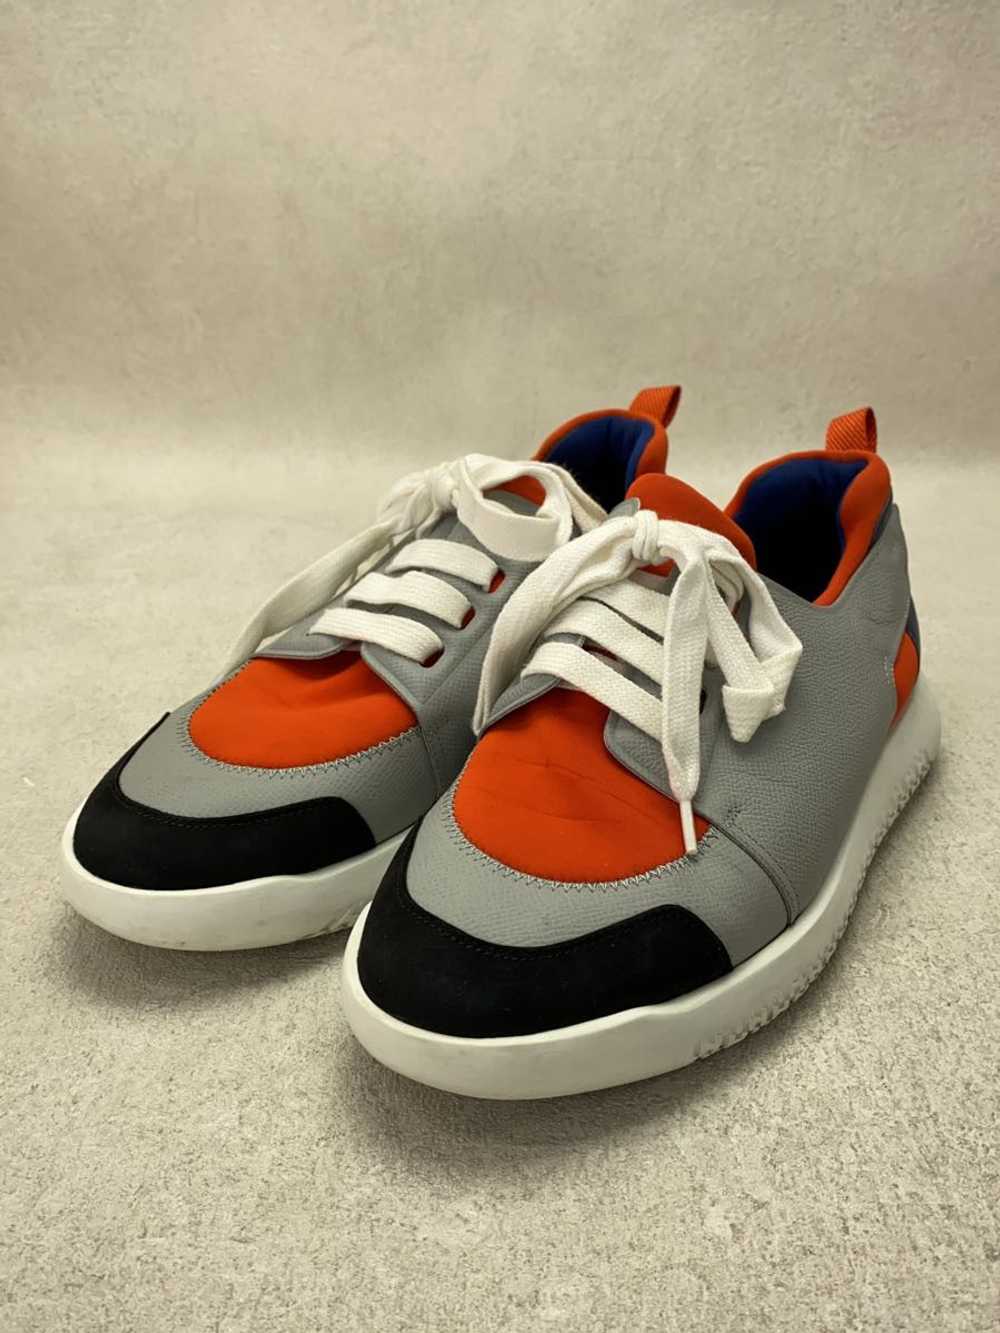 Hermes Low Cut Sneakers/39/Gry Shoes BiV99 - image 2